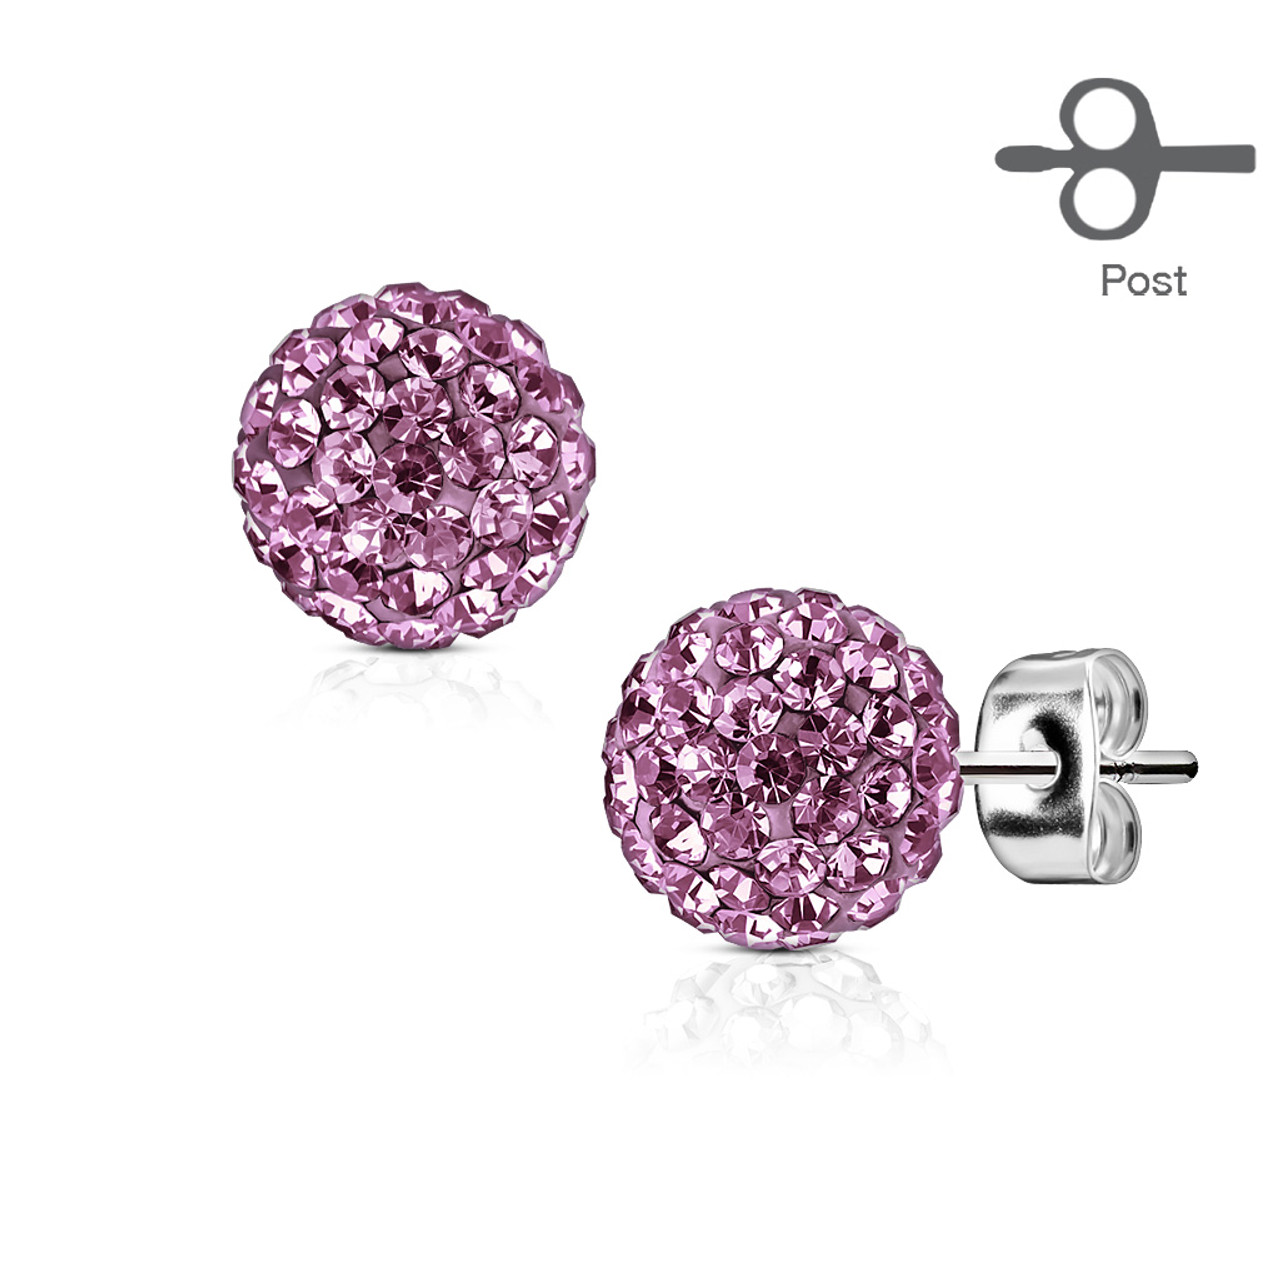 MJ-SE0106 Pair of 316L Surgical Steel Stud Earring with Multi Crystal ...